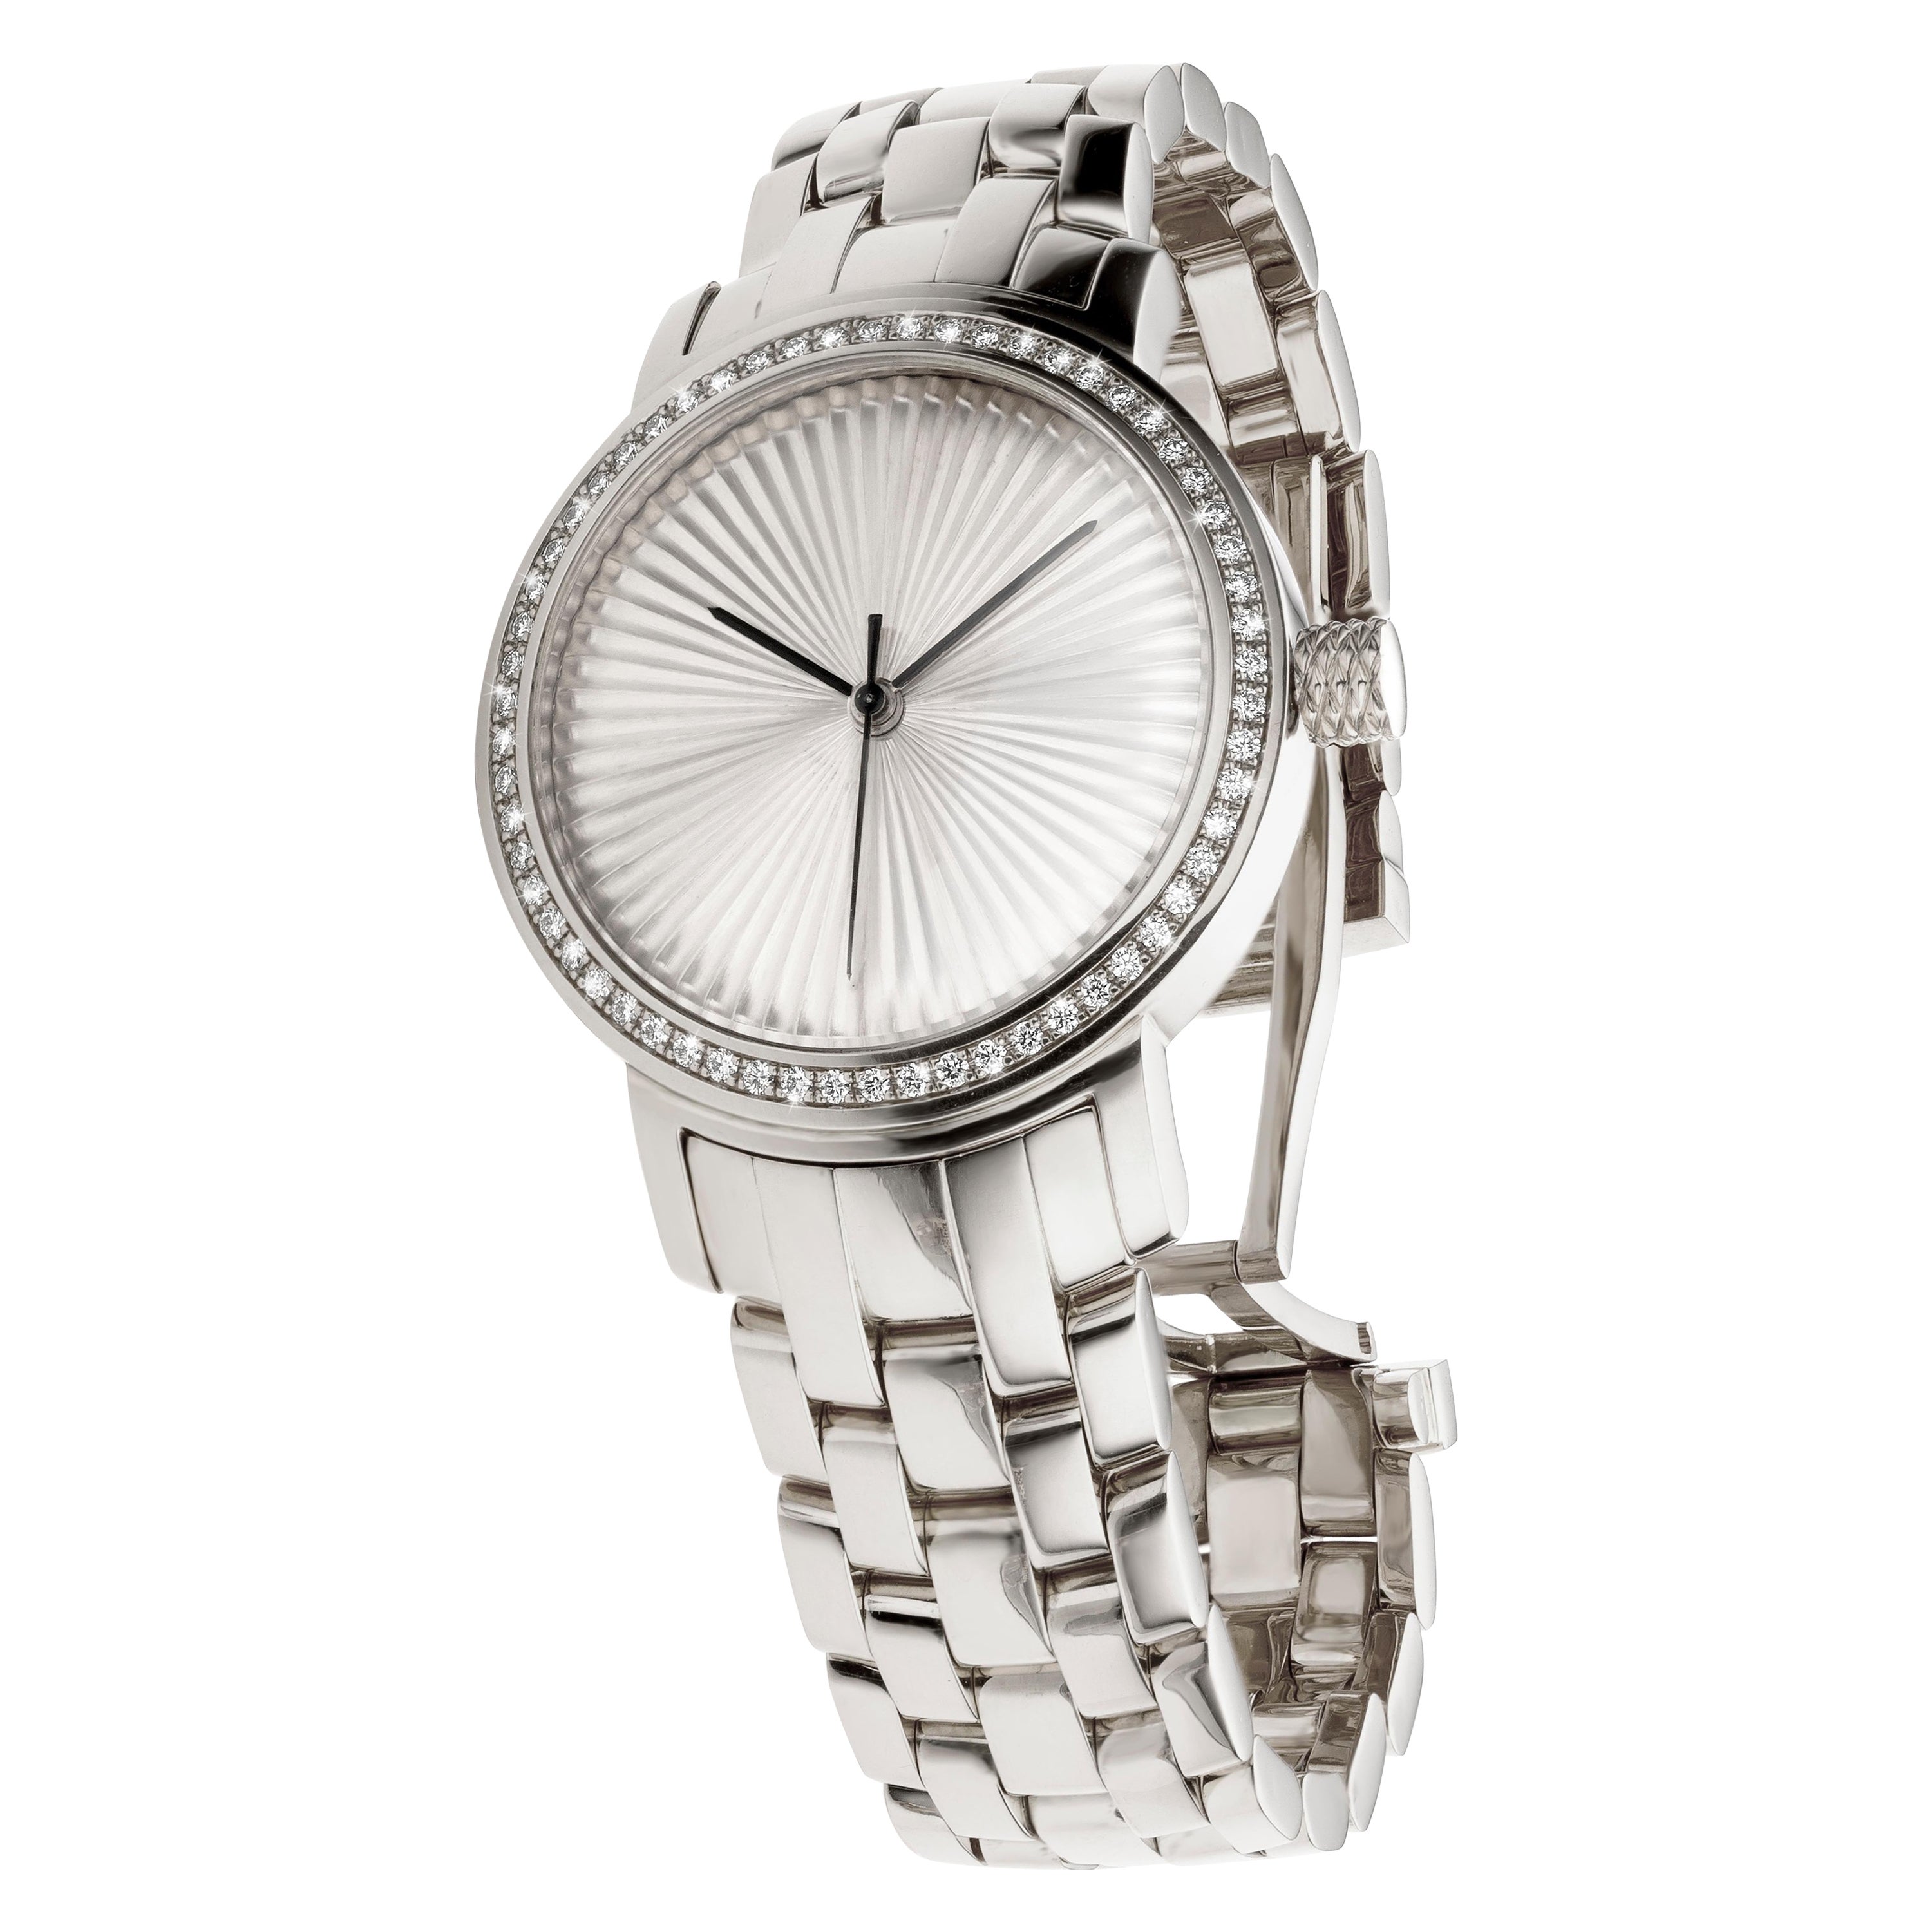 Cober “N°2” Ladies limited-edition White Gold with 60 Diamonds Wristwatch For Sale